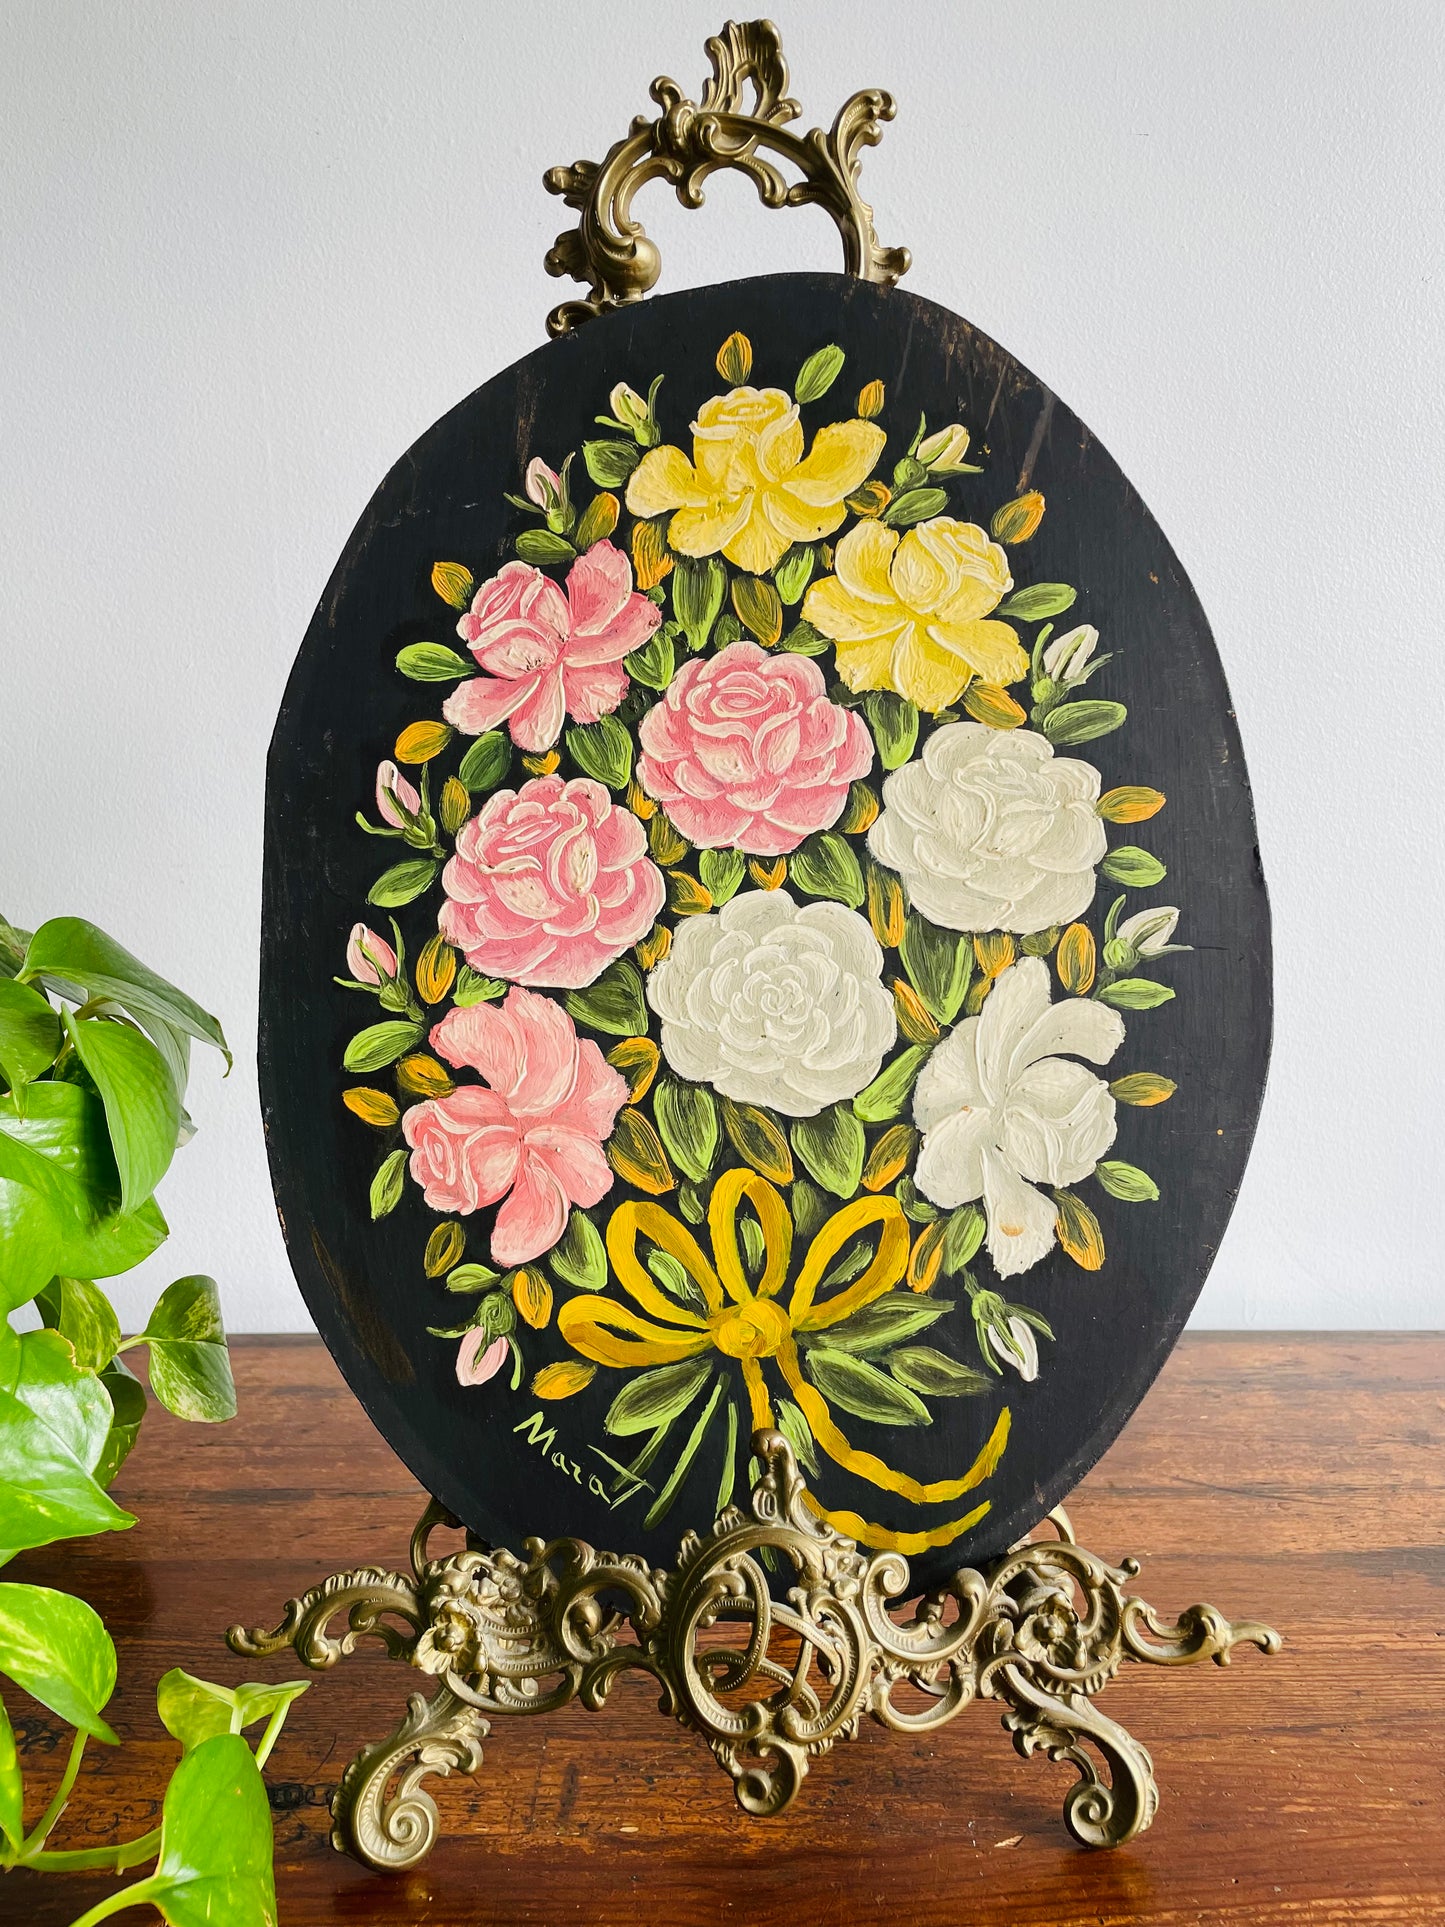 Original Art Oval Painting of Flower Bouquet - Signed by Artist - Found in Lisbon, Portugal